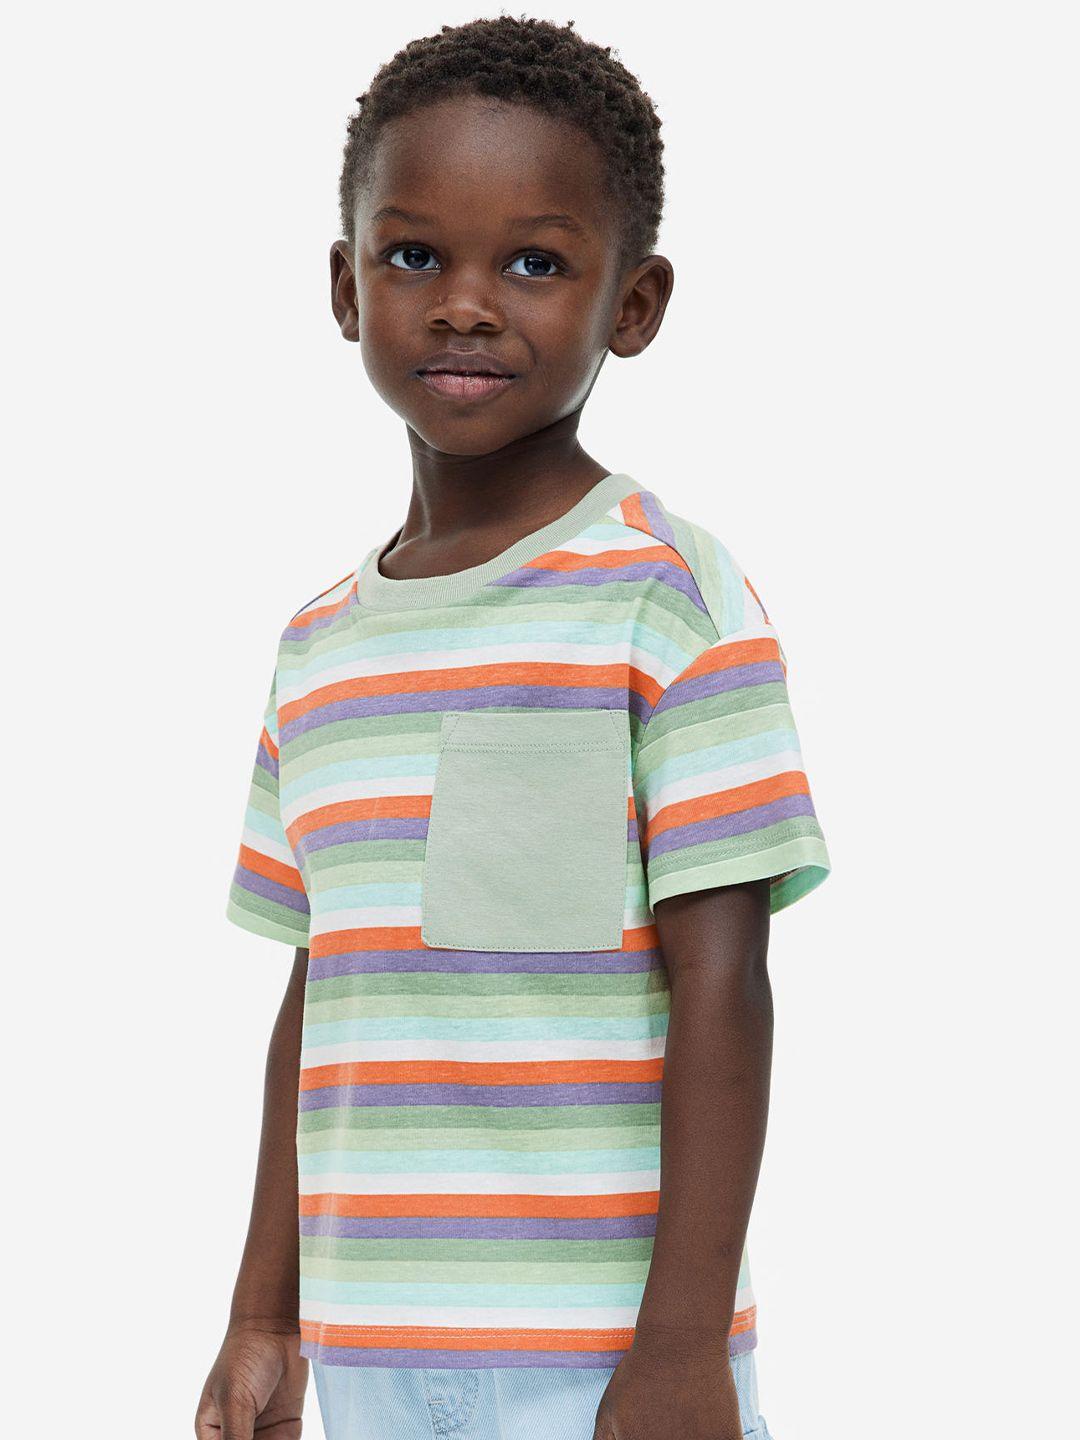 h&m boys pack of 2 pure cotton striped t-shirts